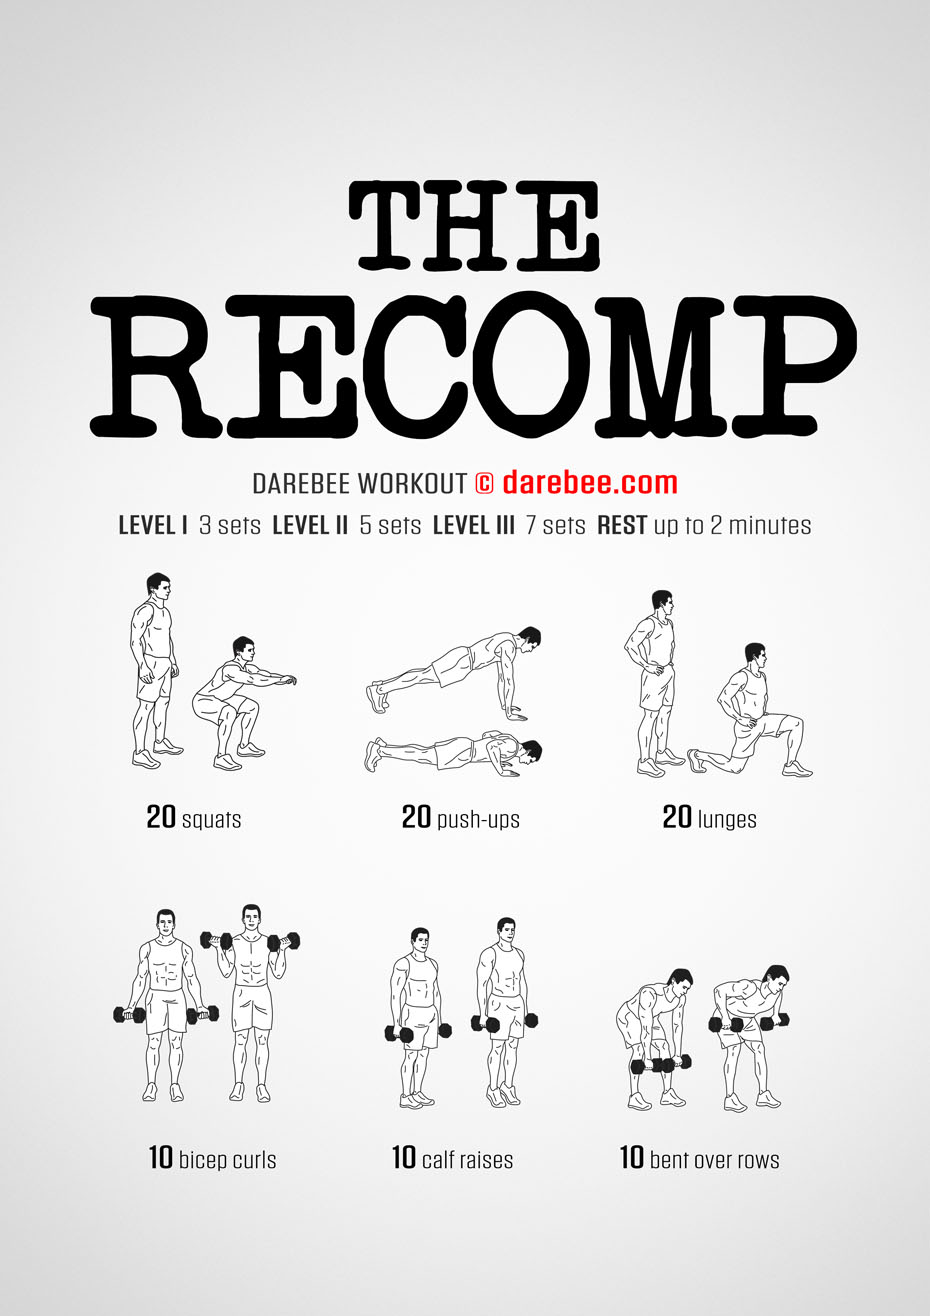 Effective workouts for body recomposition